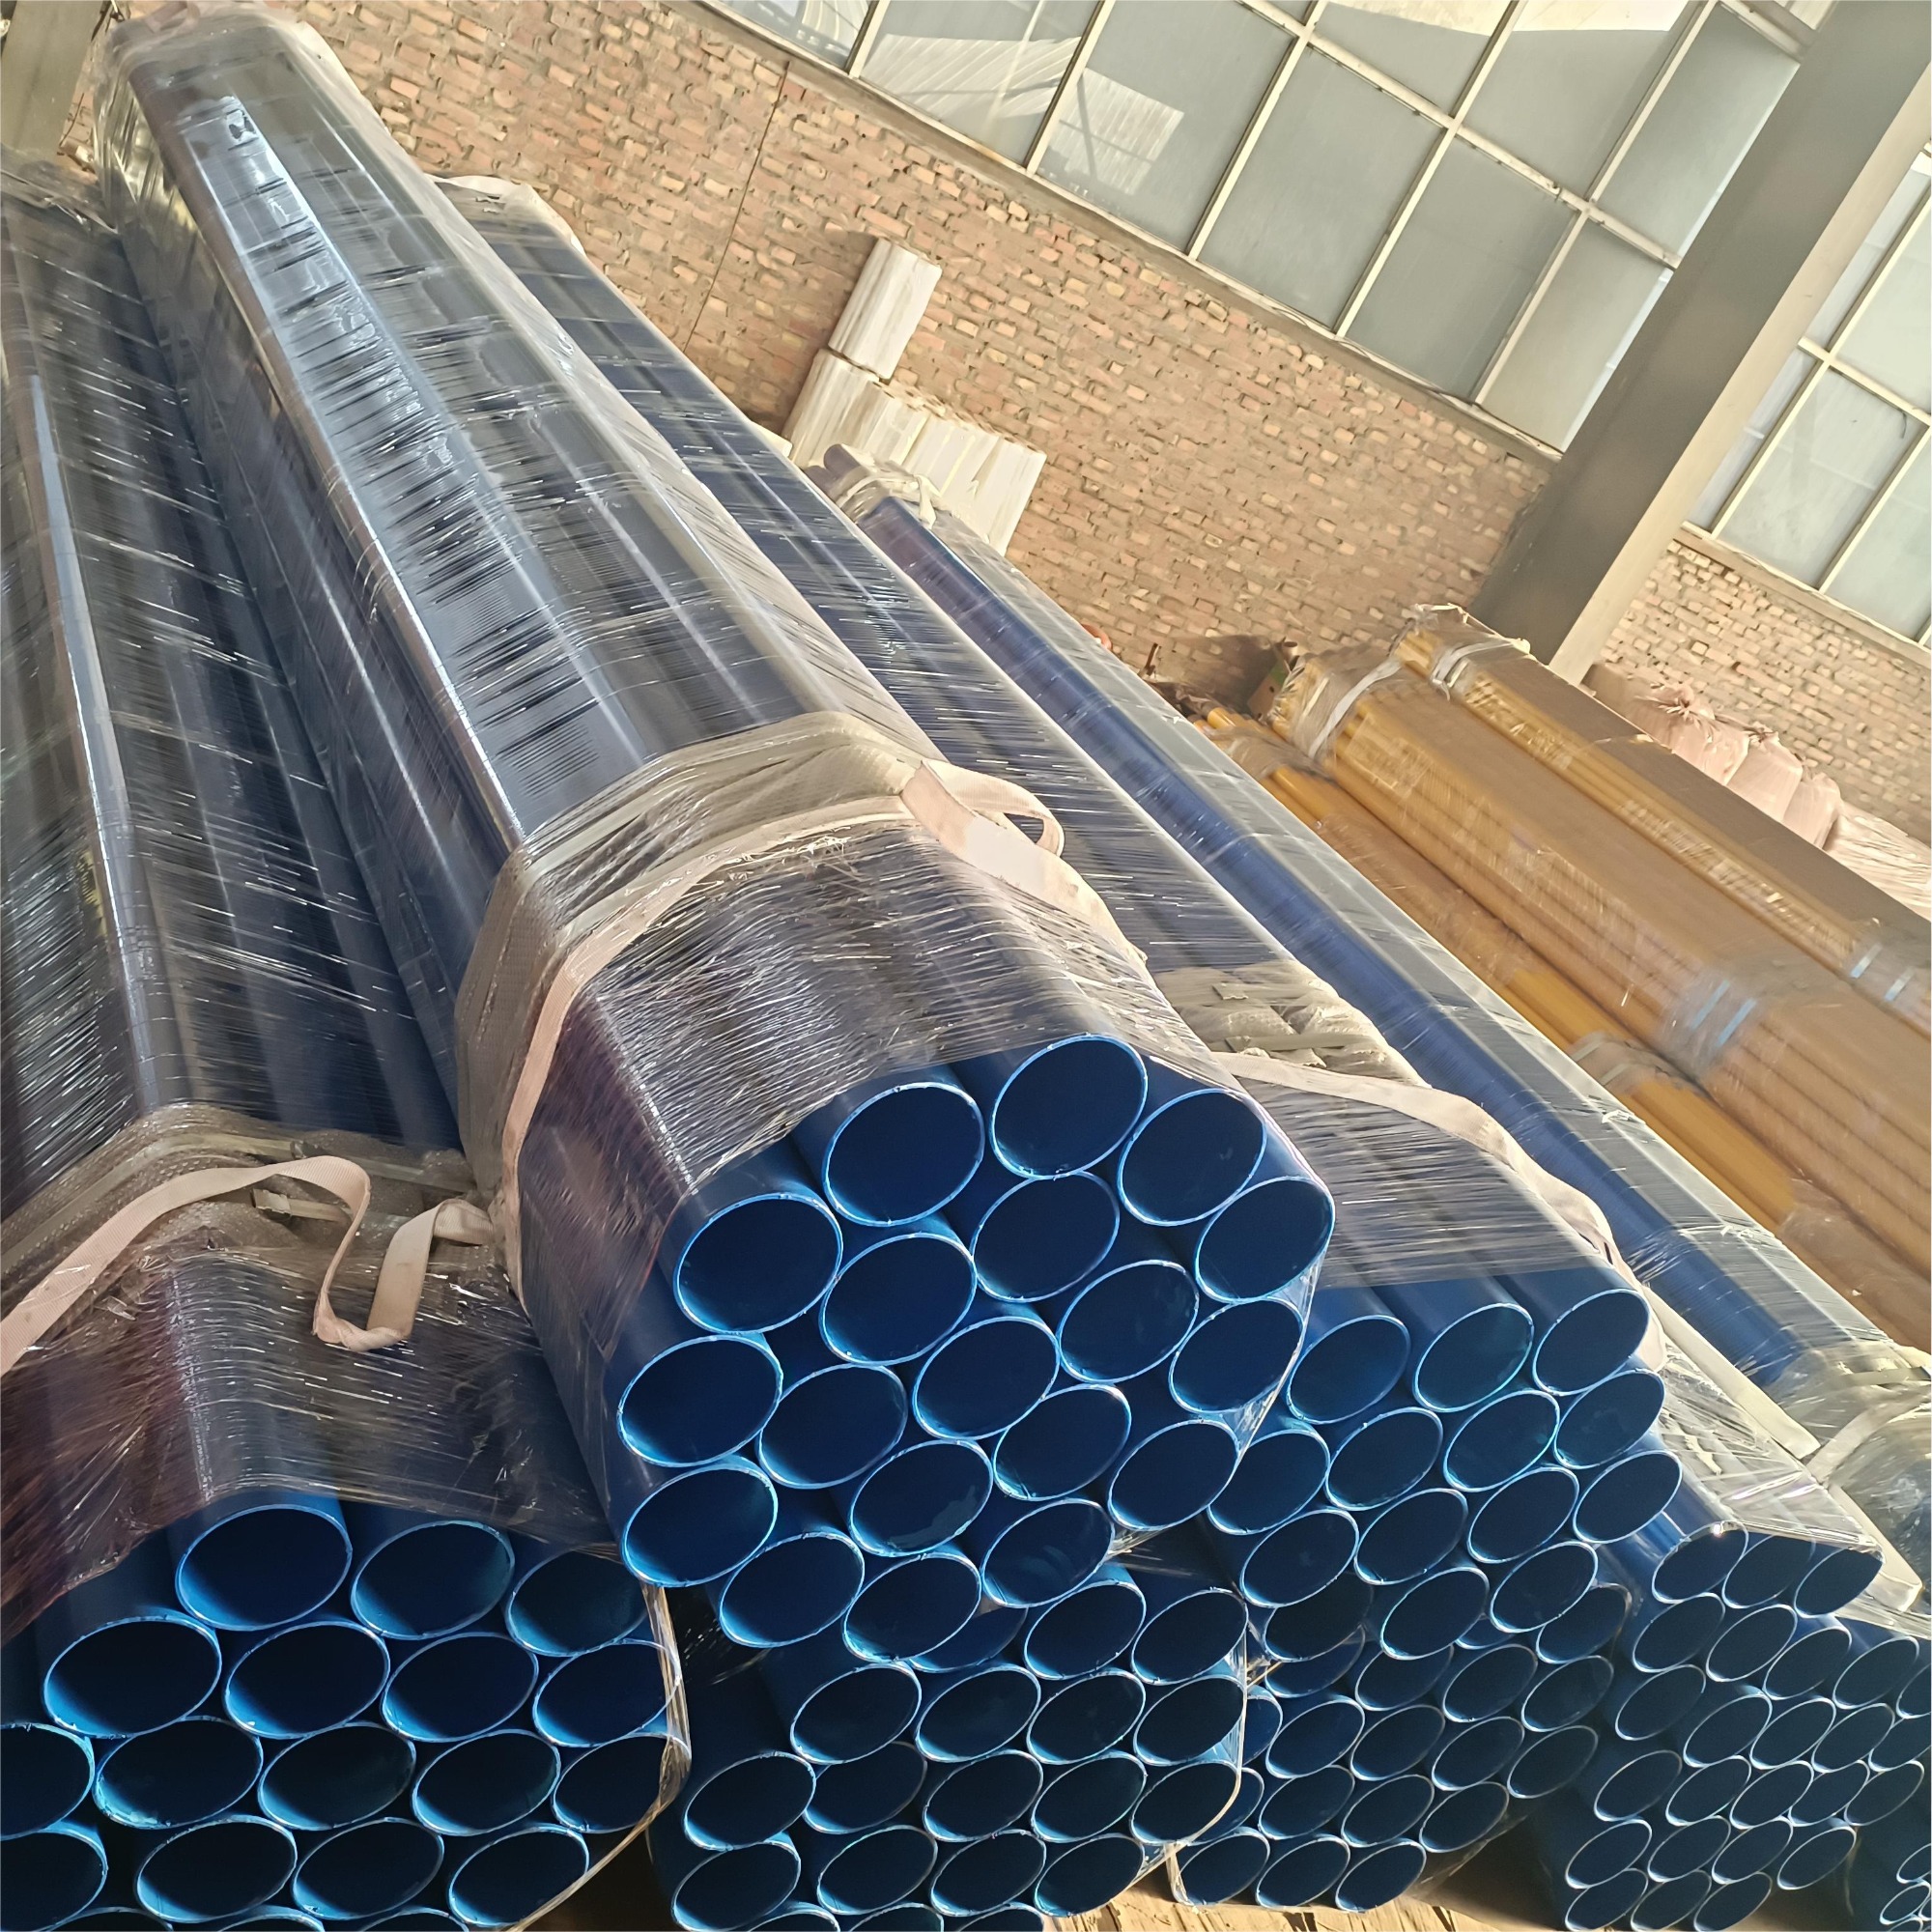 What is the difference between API 5L seamed steel pipe and API 5L seamless steel pipe?